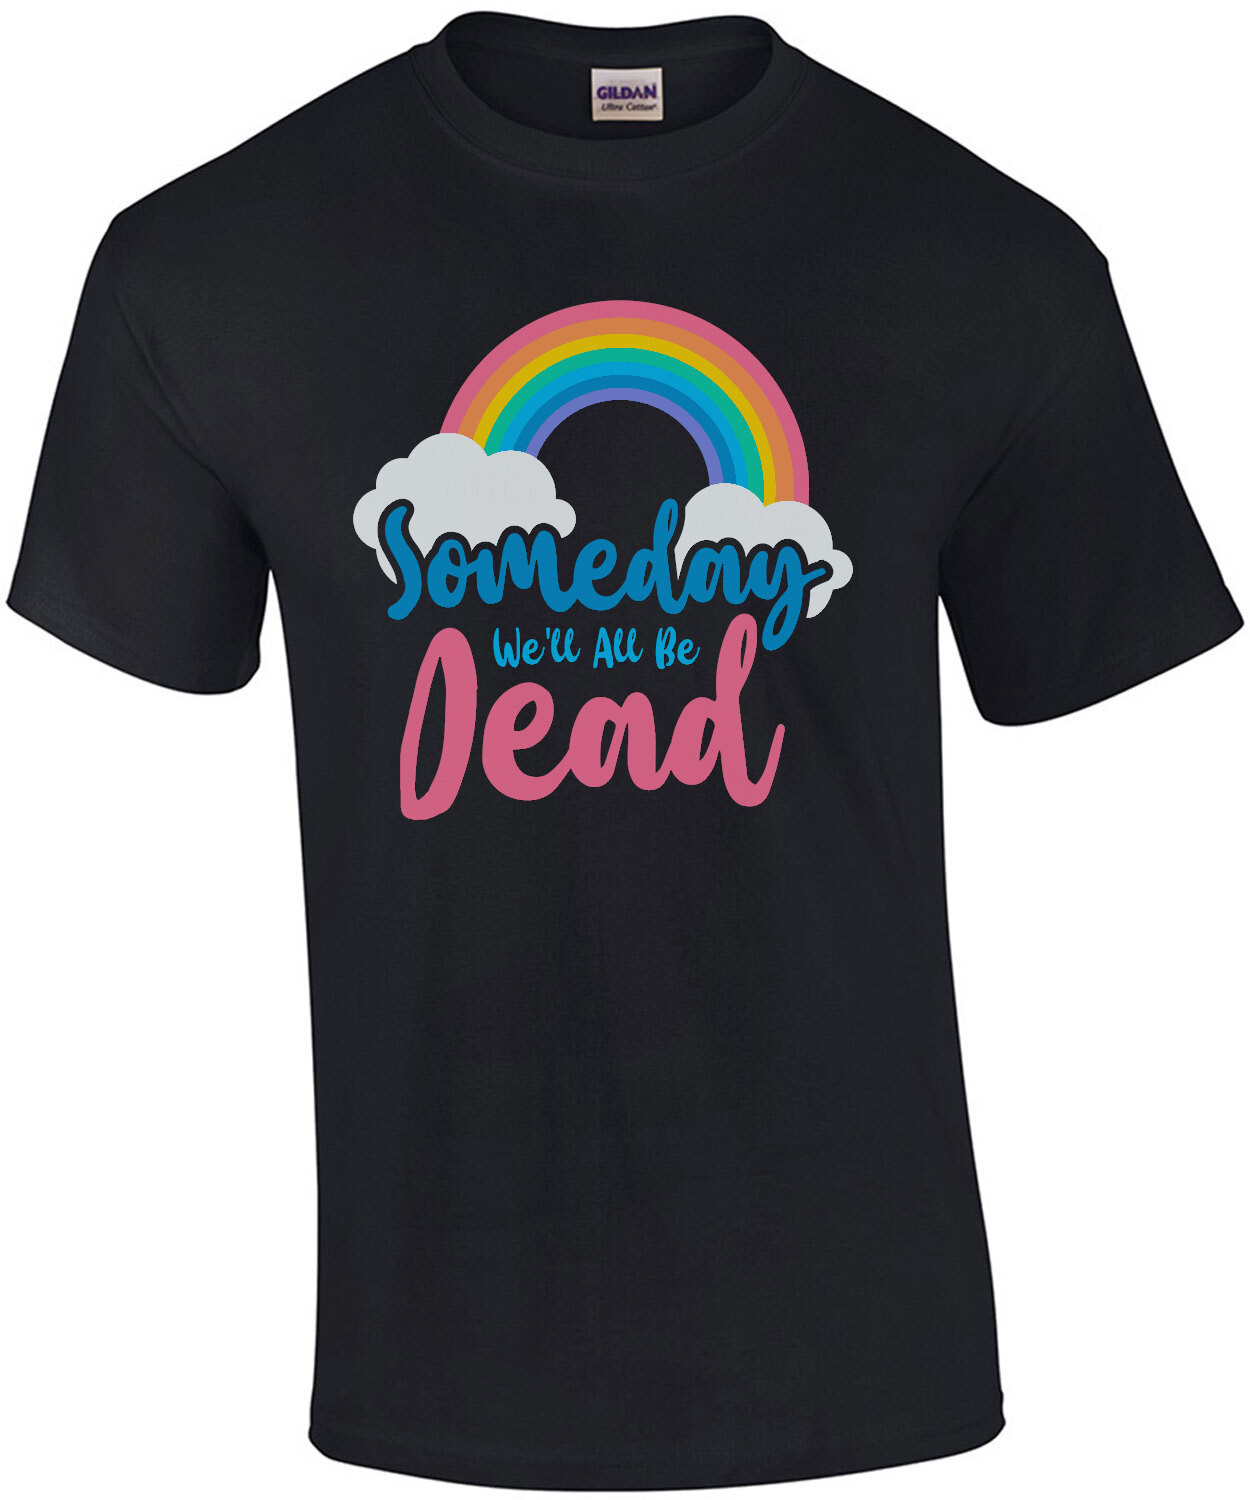 Someday we'll all be dead - funny sarcastic t-shirt